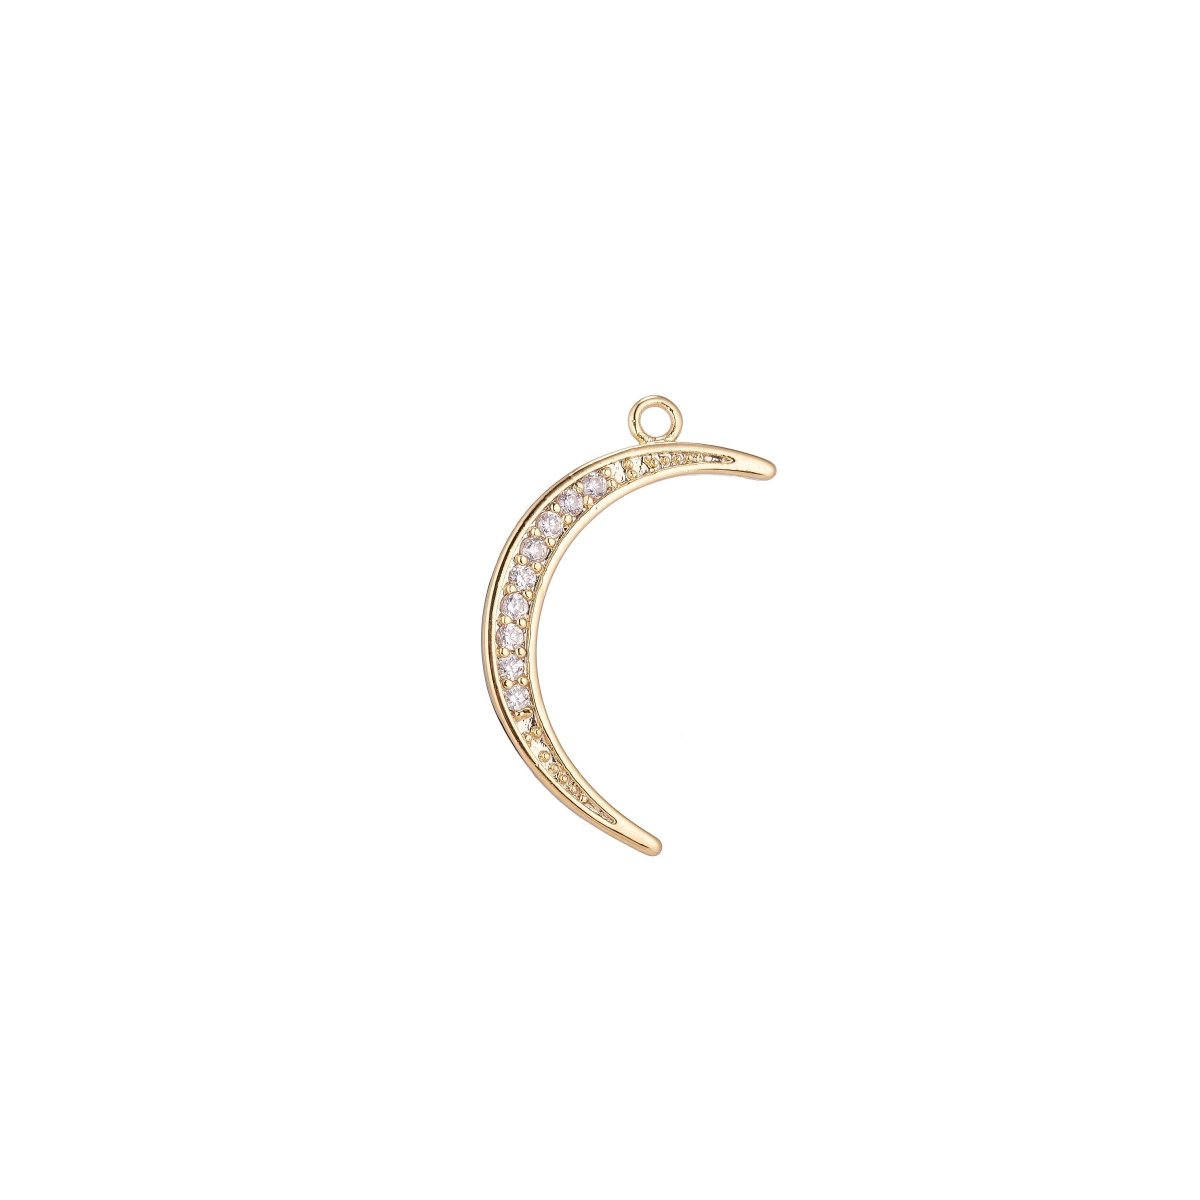 1pc Thin Gold Filled Crescent Moon Celestial, Lunar, Tusk Cubic Zircon Layered Necklace Pendant Charm Bead Findings for Jewelry Making C-096 - DLUXCA